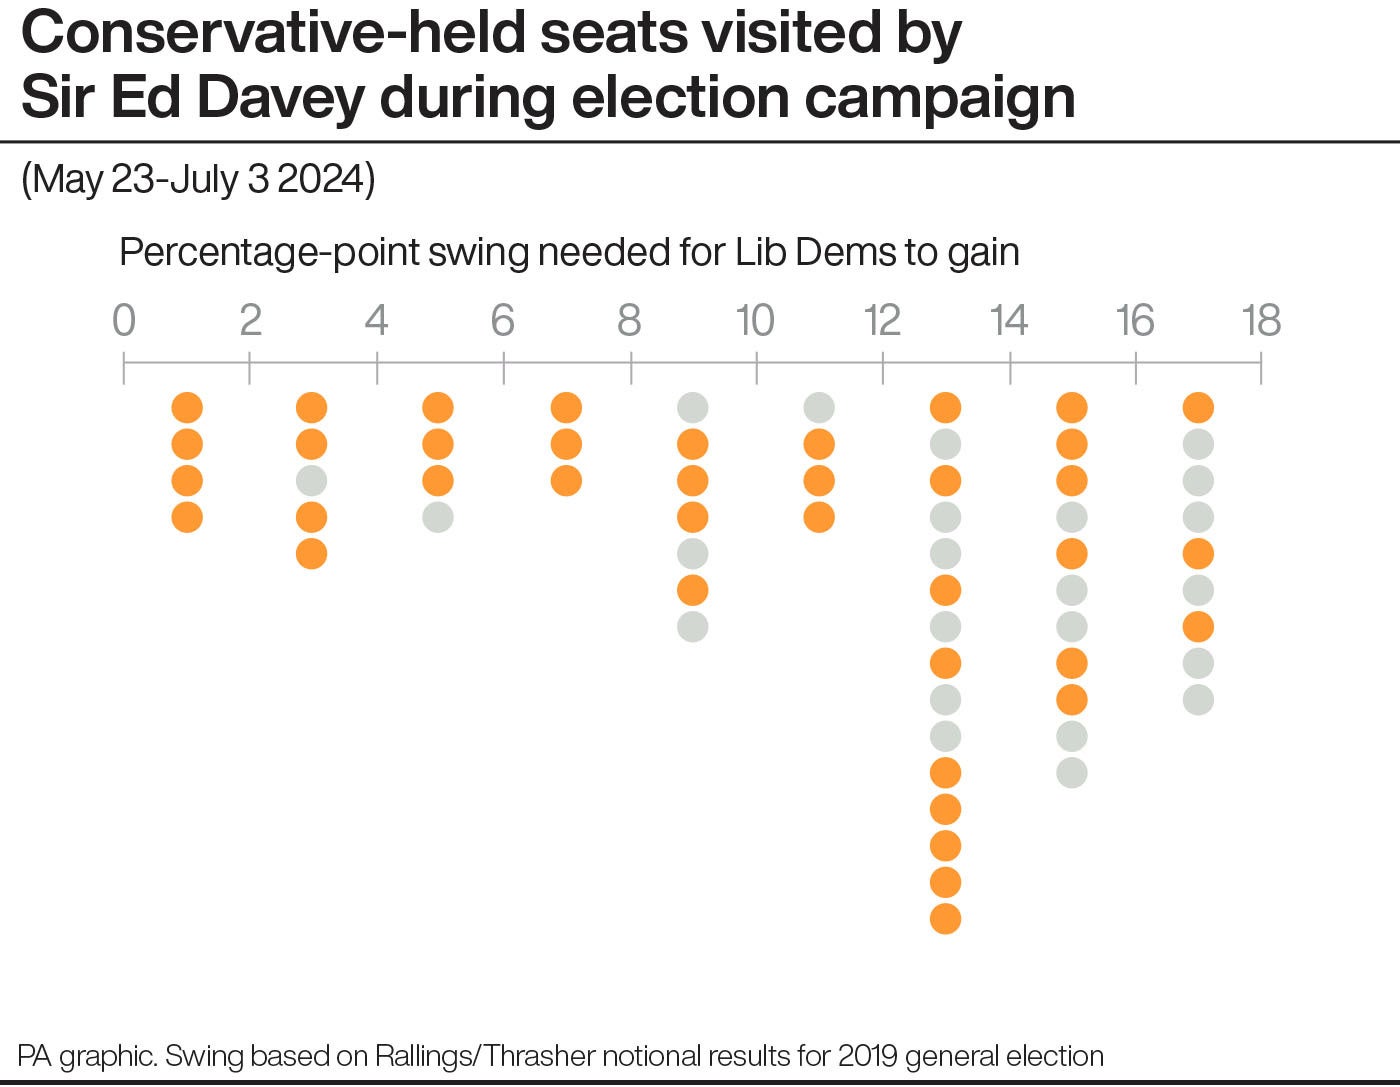 Conservative-held seats visited by Sir Ed Davey during the election campaign (PA Graphics)